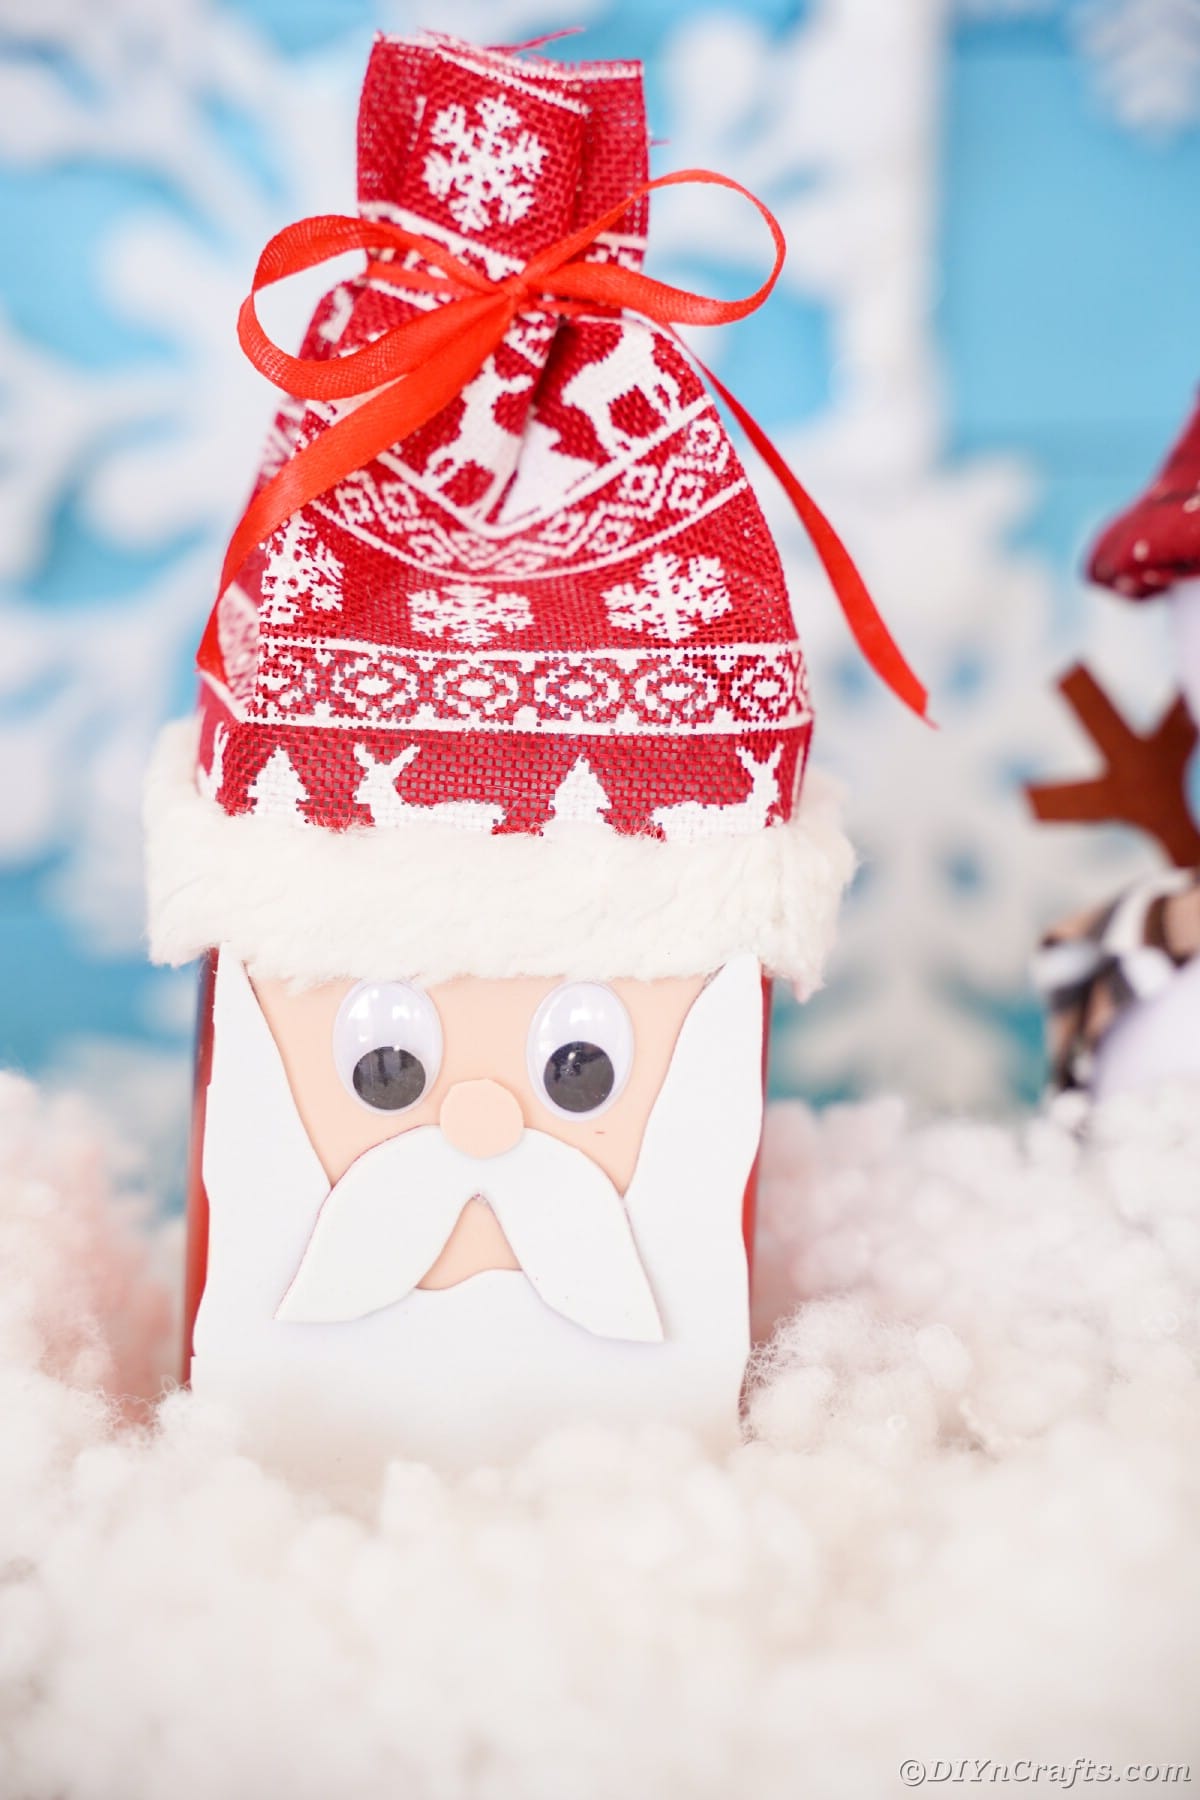 Foam Santa face on box with Nordic hat sitting on fake snow